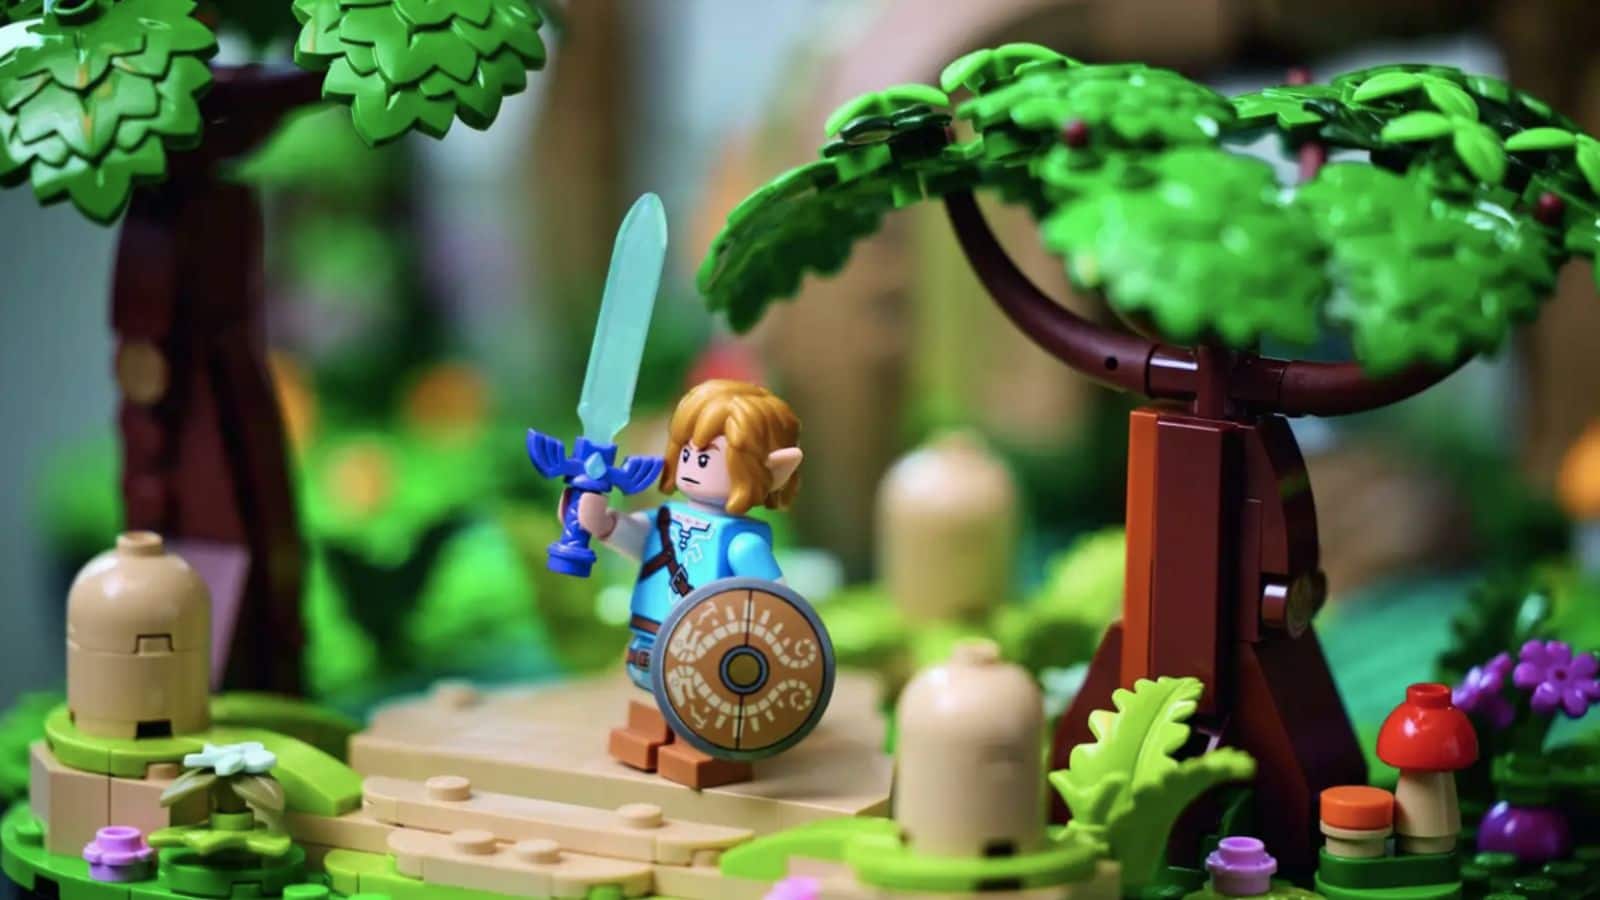 Lego announces first playset based on Nintendo's Zelda games